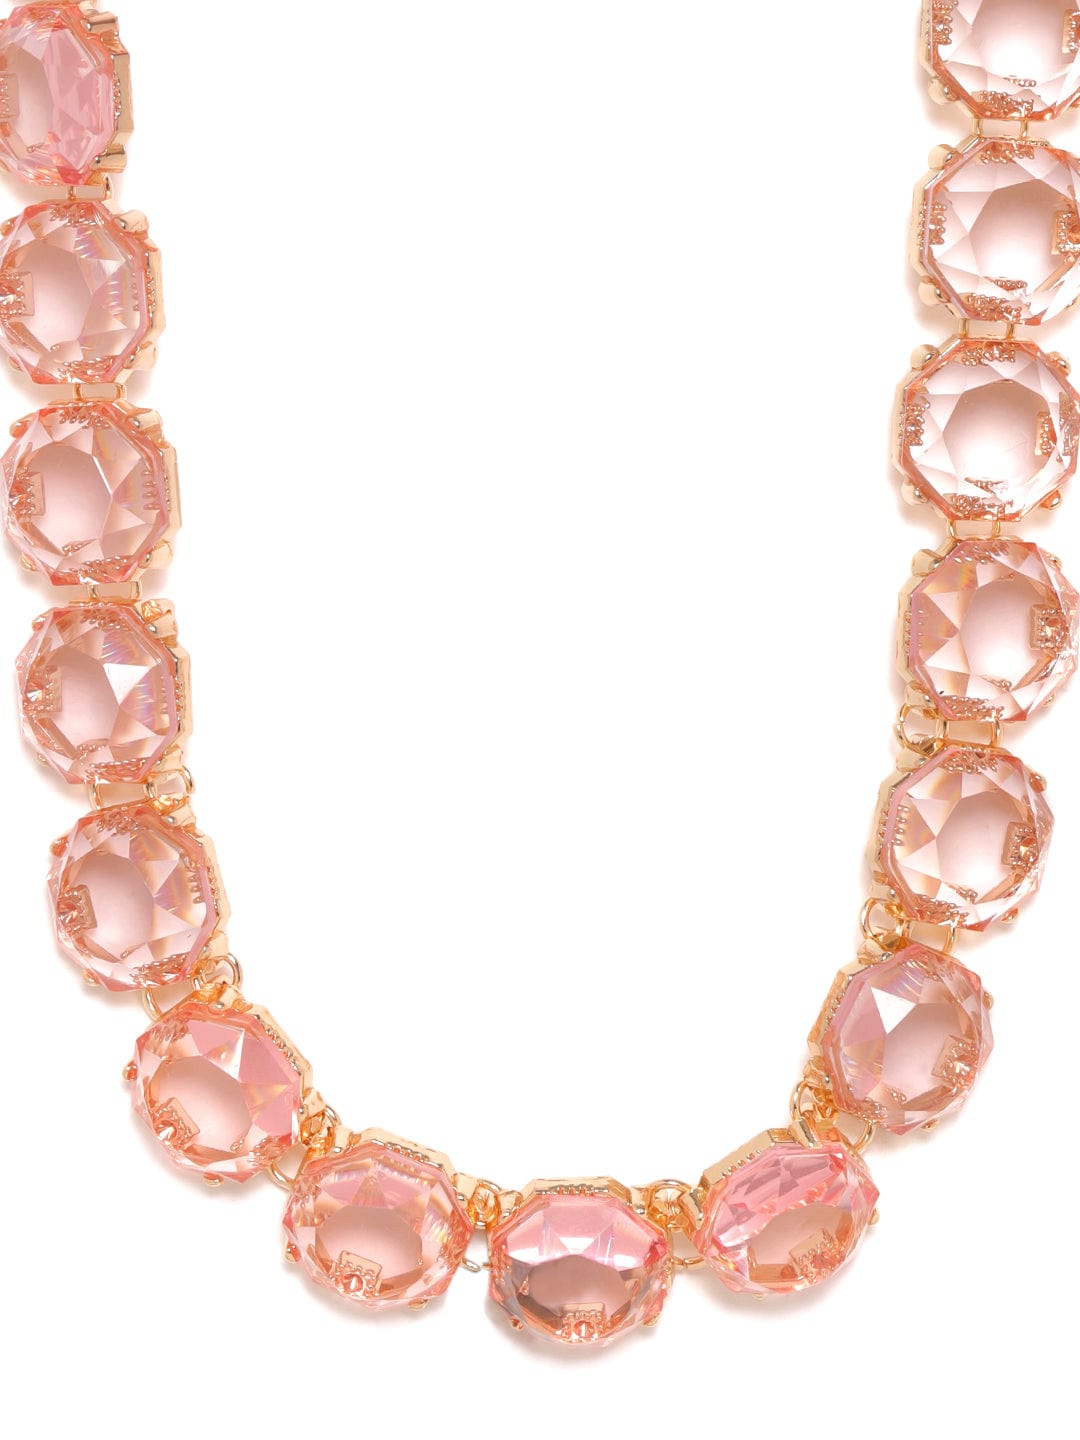 Rubans Voguish 18K Gold Plated Pink Crystal Studded Statement Necklace Necklaces, Necklace Sets, Chains & Mangalsutra